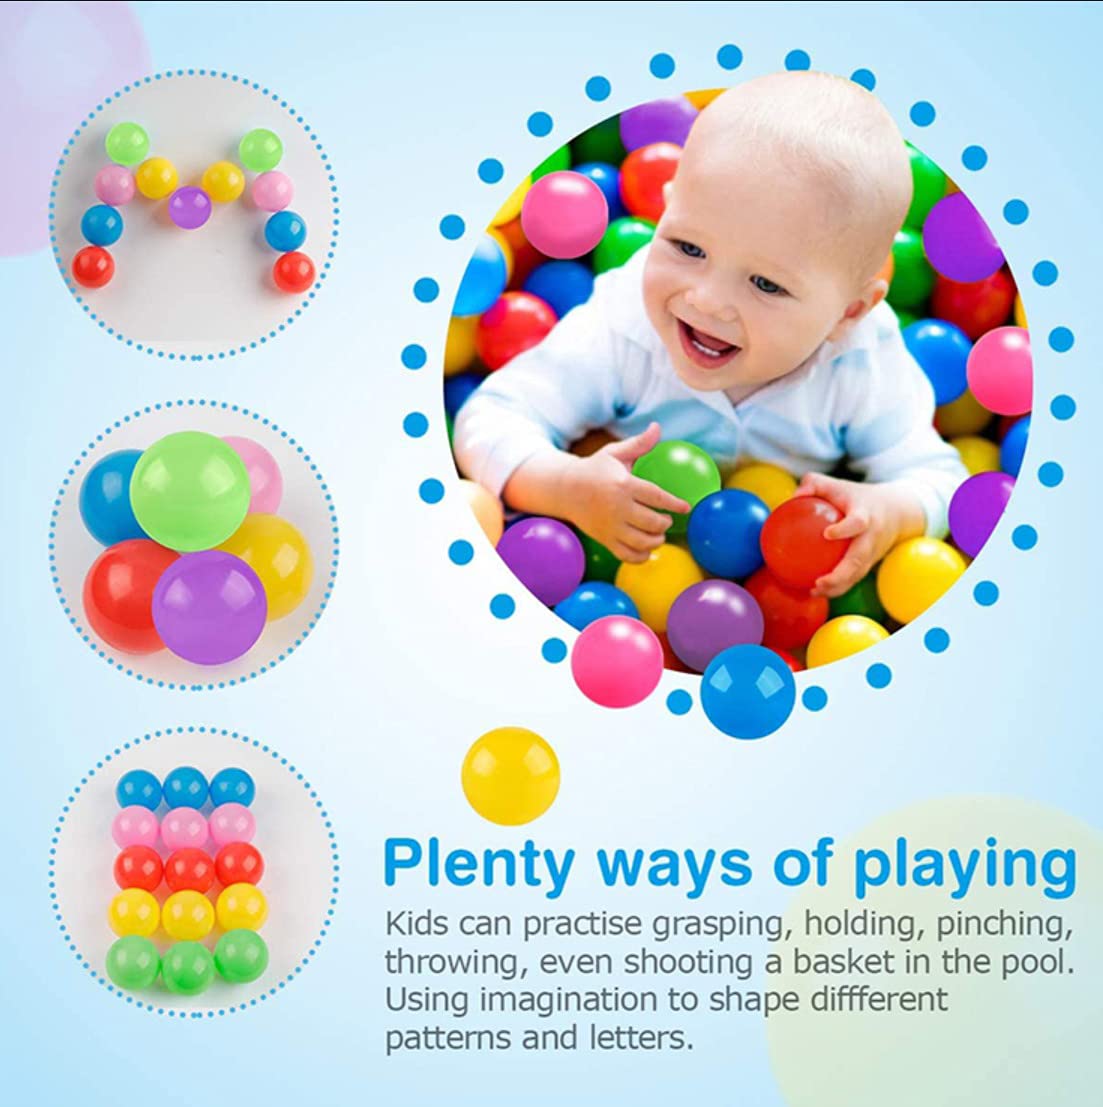 Large Size ABS Plastic Multi-Colored Balls for Ball Pool,Swimming Pool for Kids ( 80 mm 100 Balls)